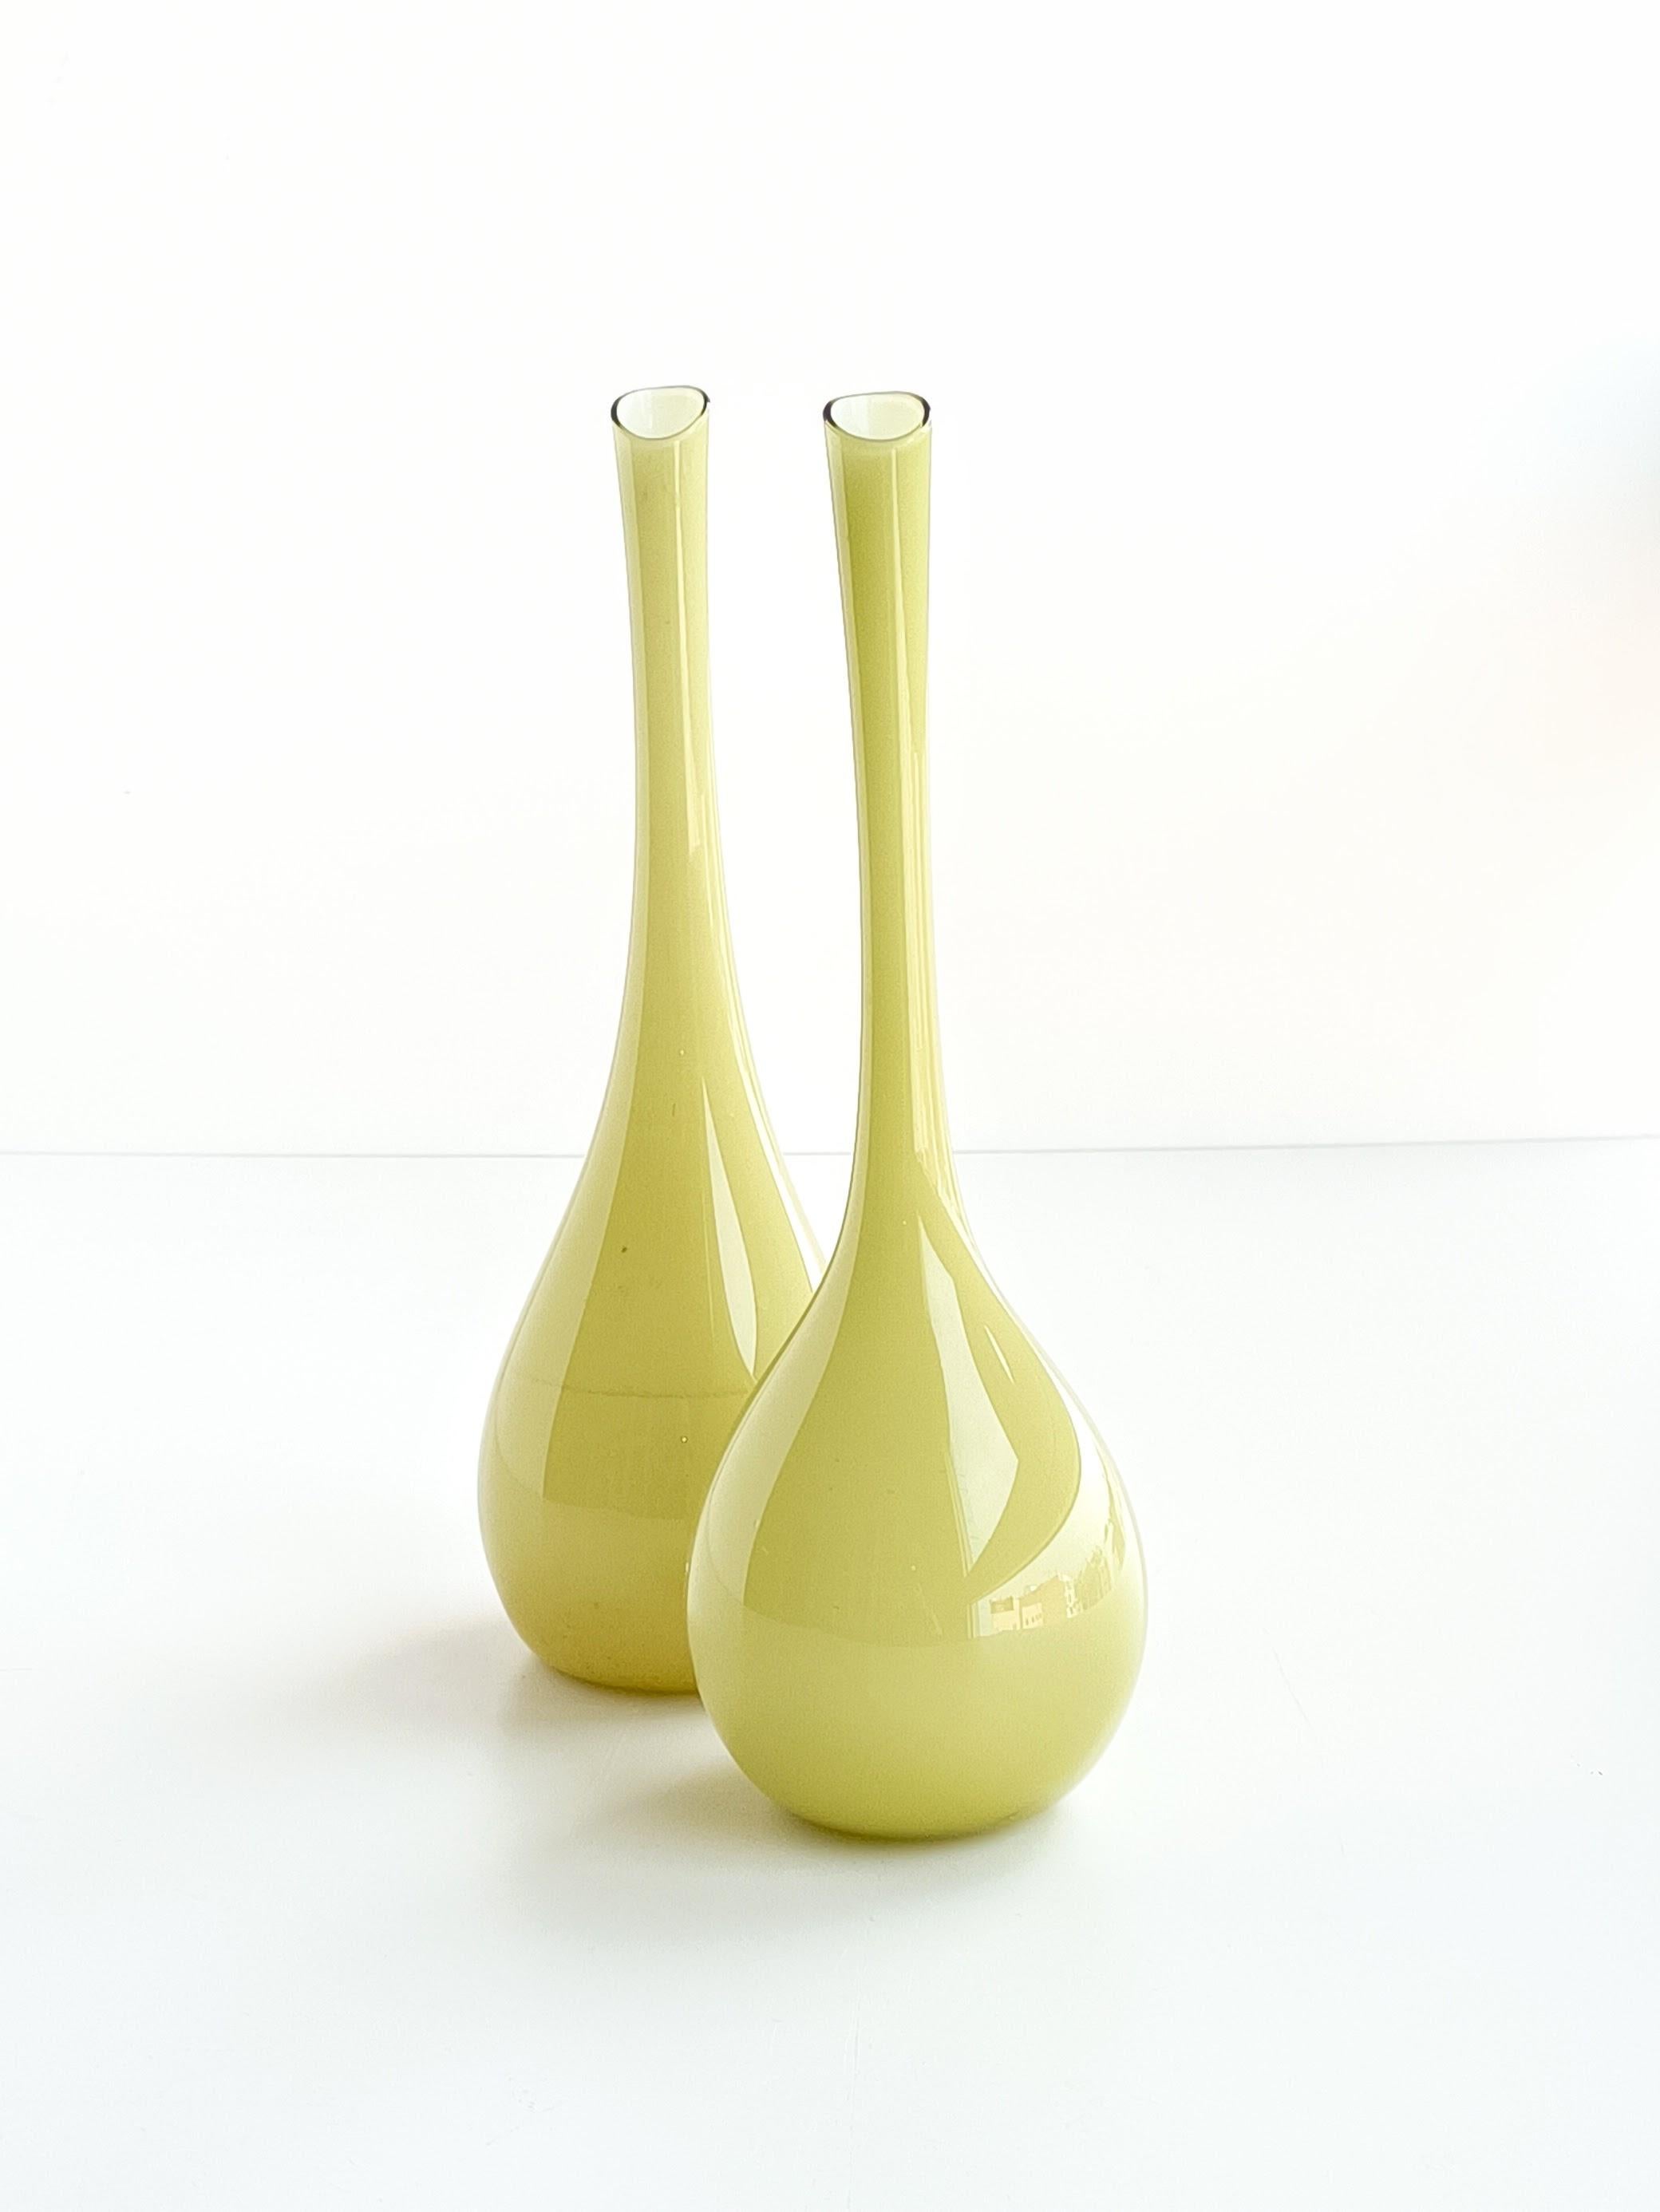 Hand-Crafted Scandinavian Modern by Gunnar Ander for Lindshammar Pair of Glass Vases, 1950s For Sale